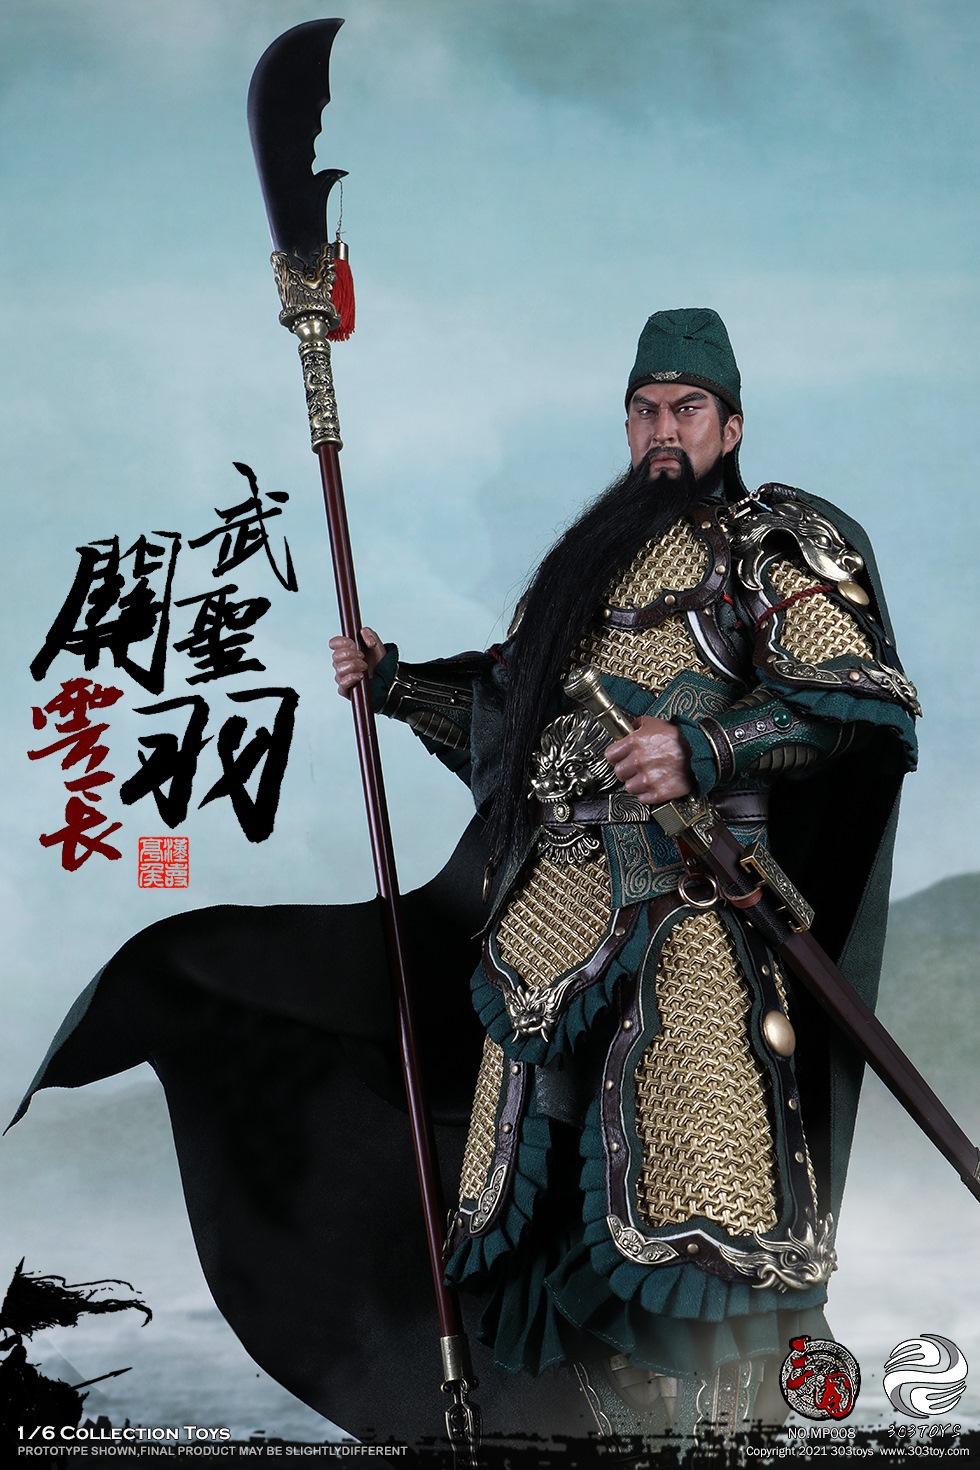 303TOYS - NEW PRODUCT: 303TOYS: 1/6 THREE KINGDOMS SERIES - MARQUIS GUAN YU YUNCHANG, GOD OF WAR (Pure Copper Yellow Wu Edition / Yellow Dragon Edition) RED RABBIT Horse 22154810